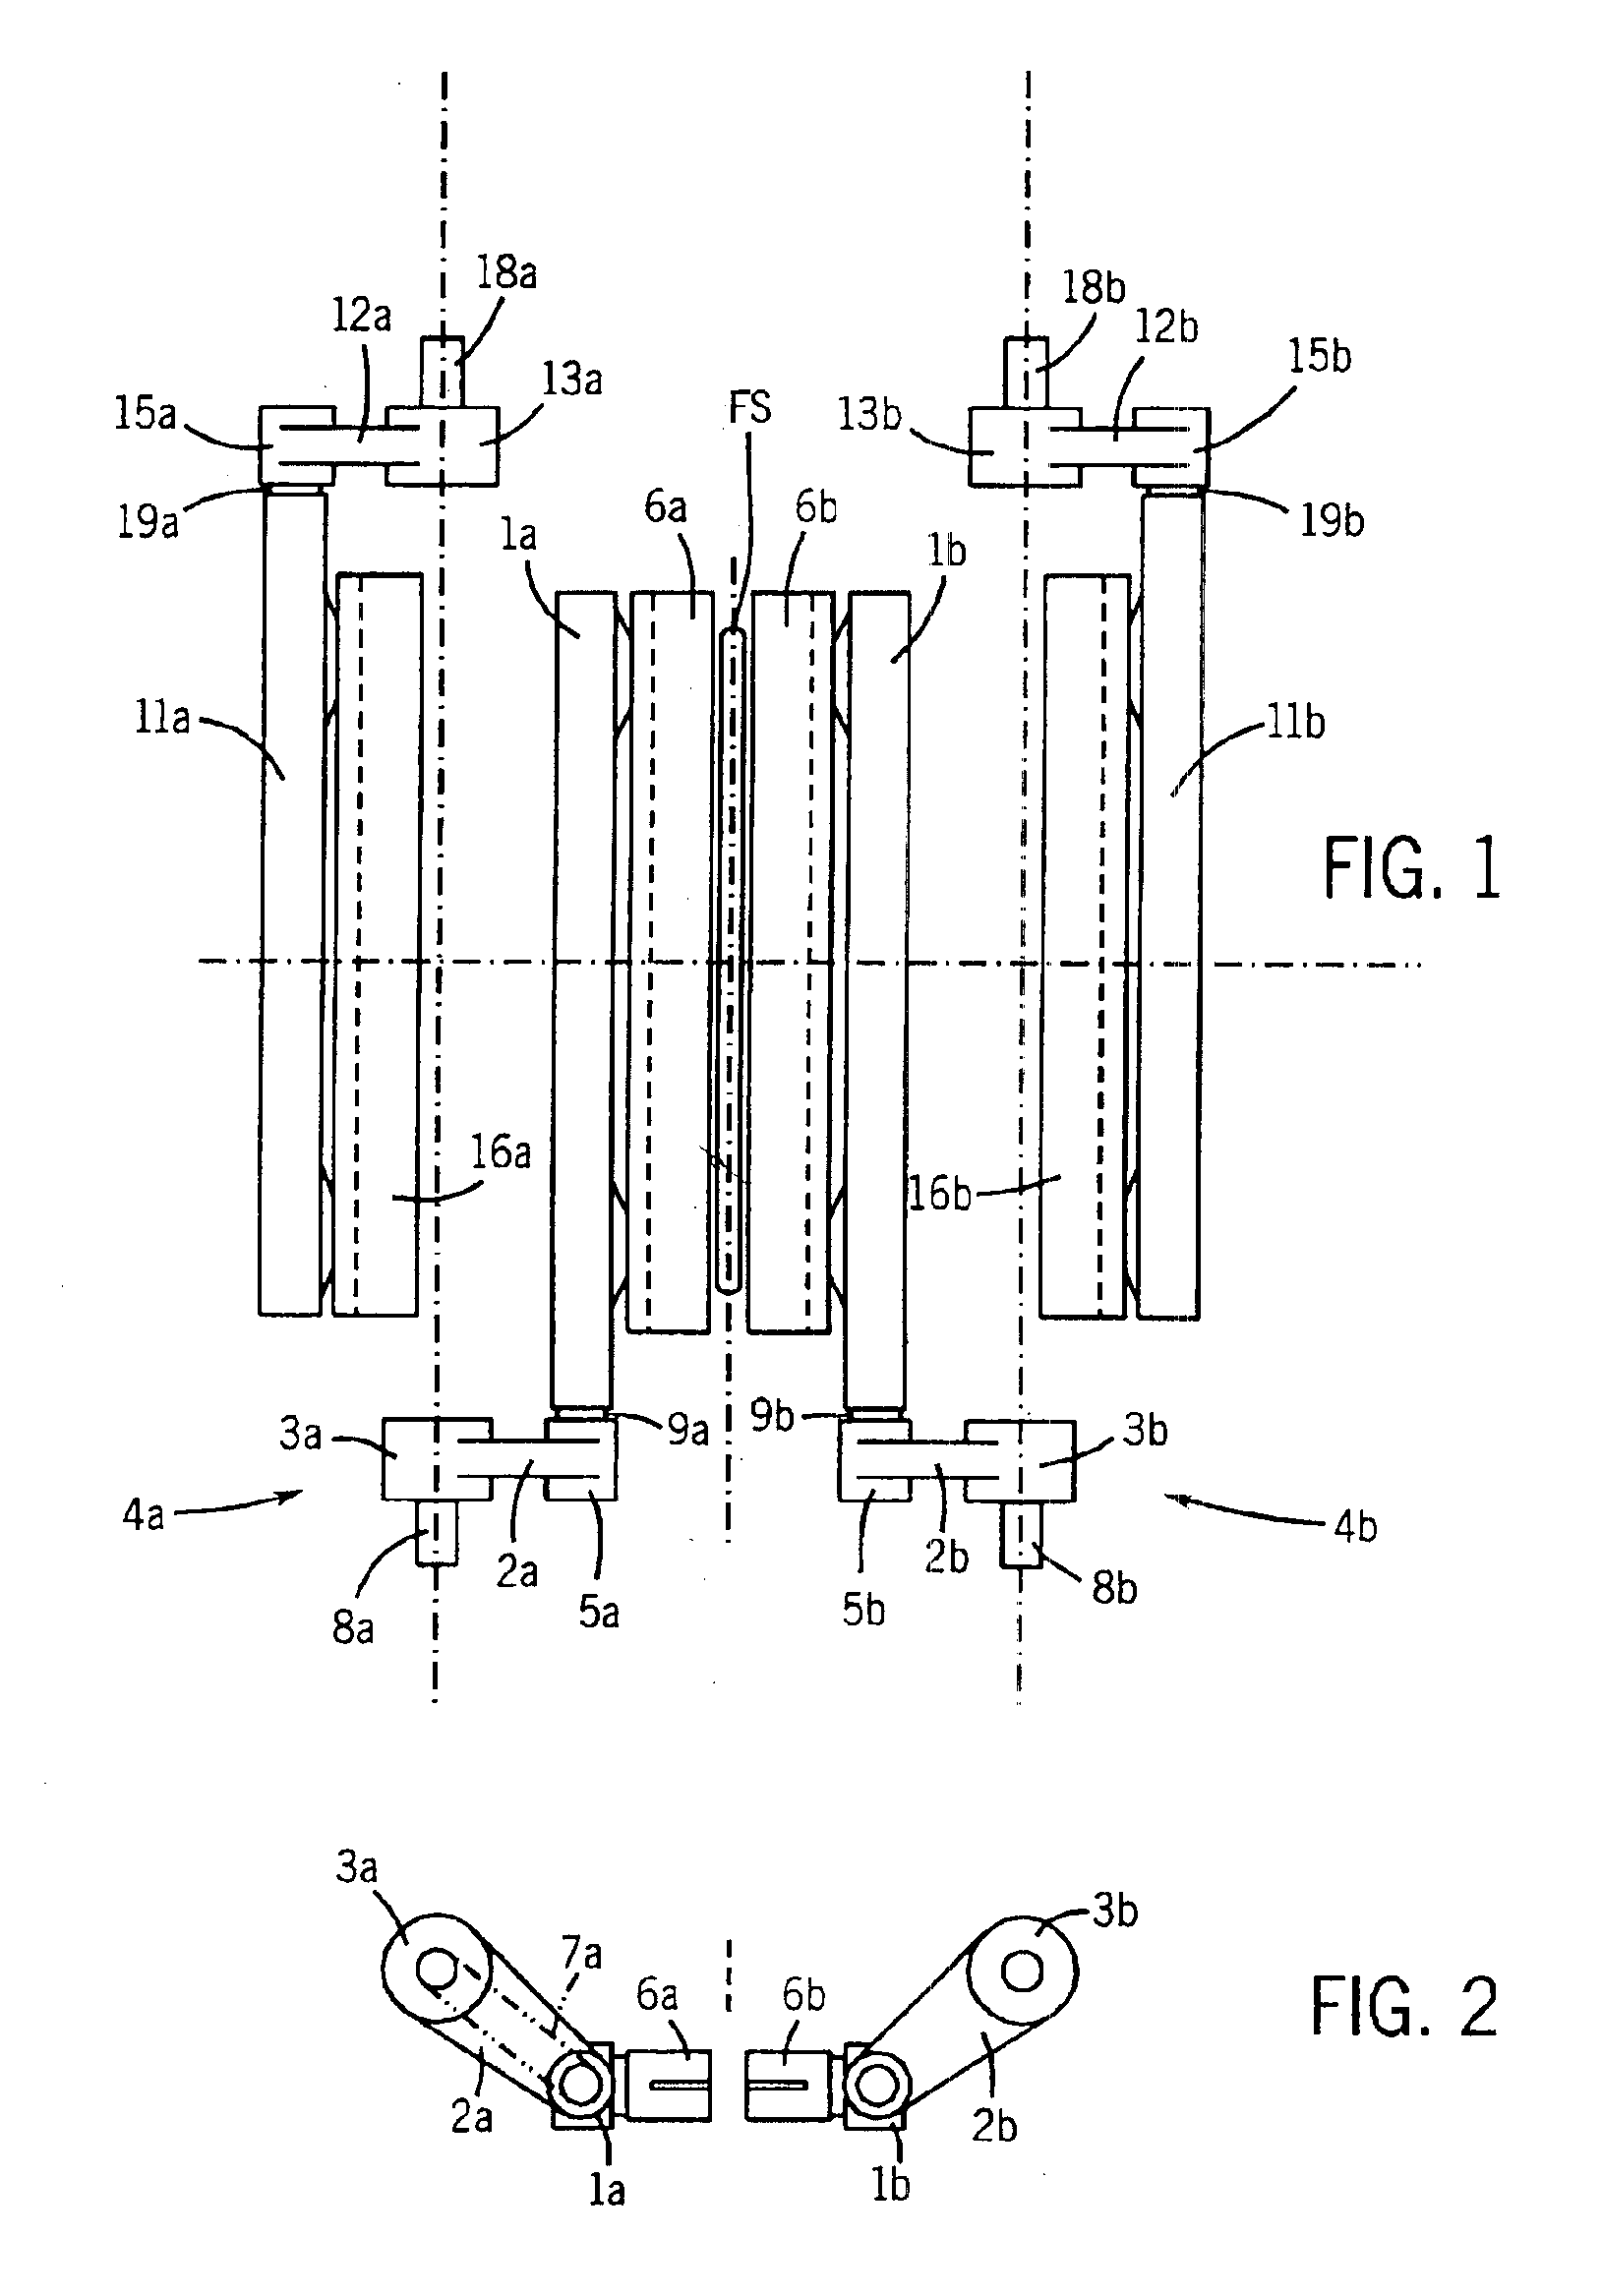 Apparatus for processing continuously fed elongate material